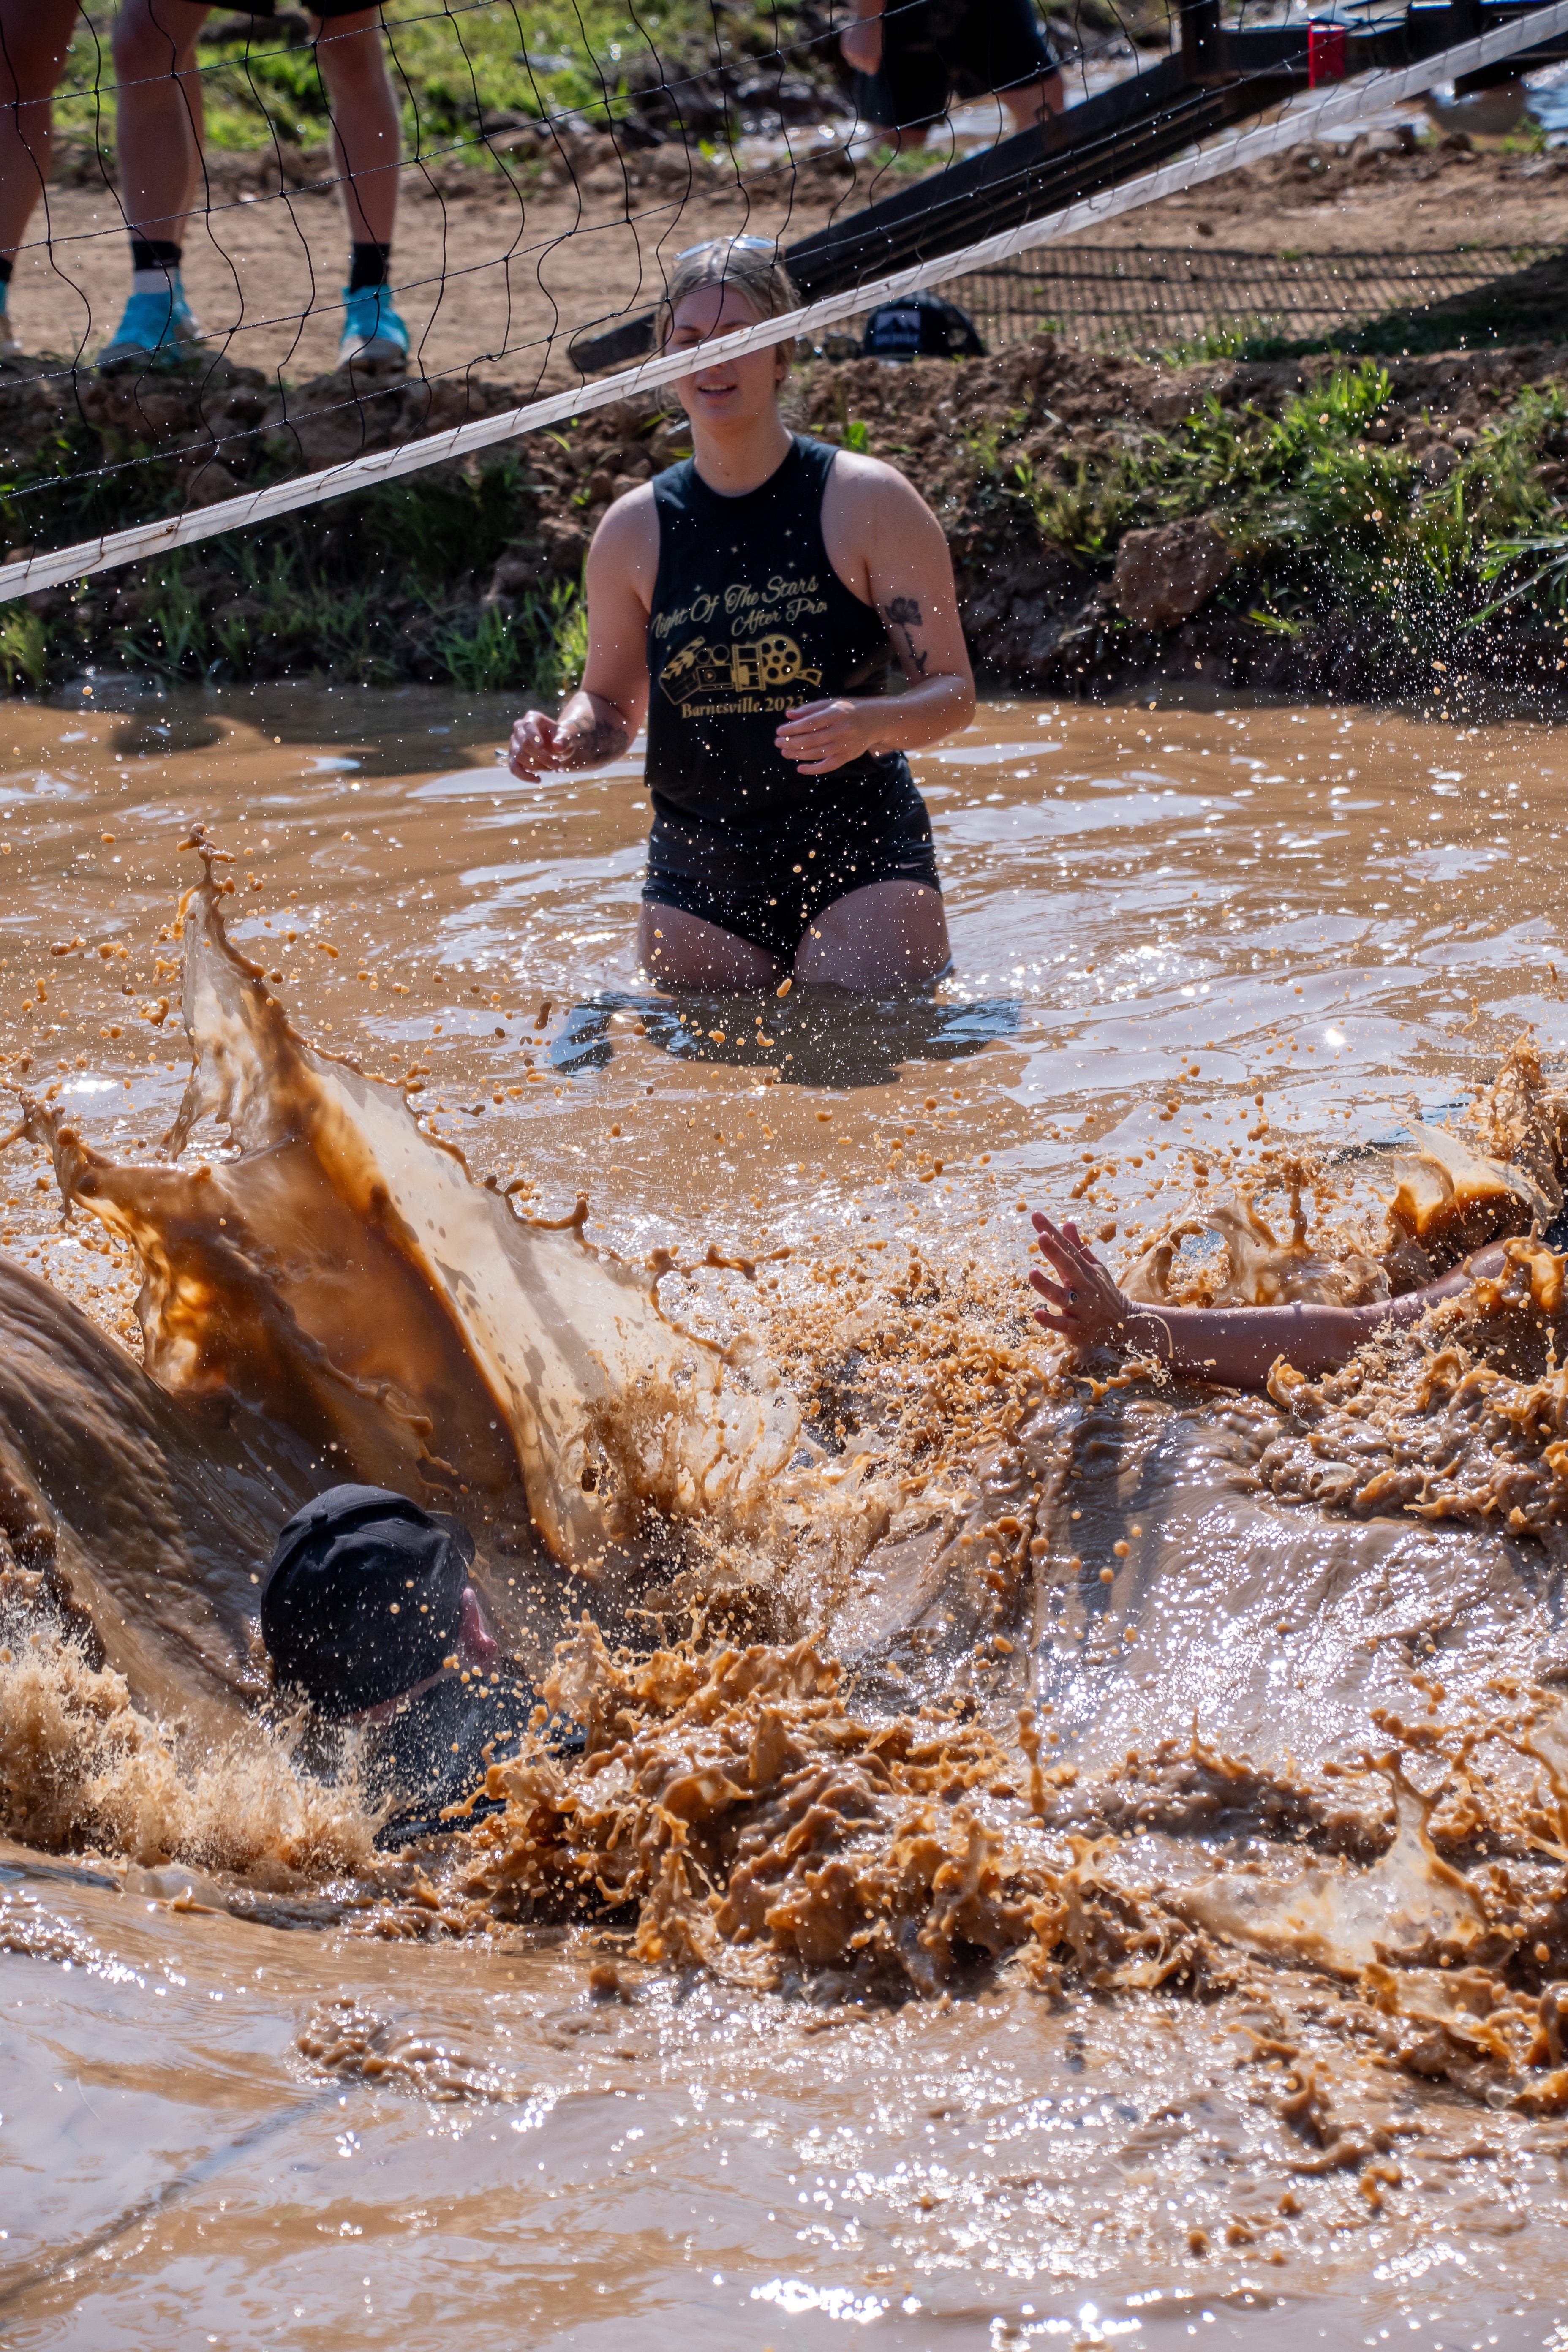 Plenty of mud, competition and fun at the Quaker City Mud Volleyball tournament